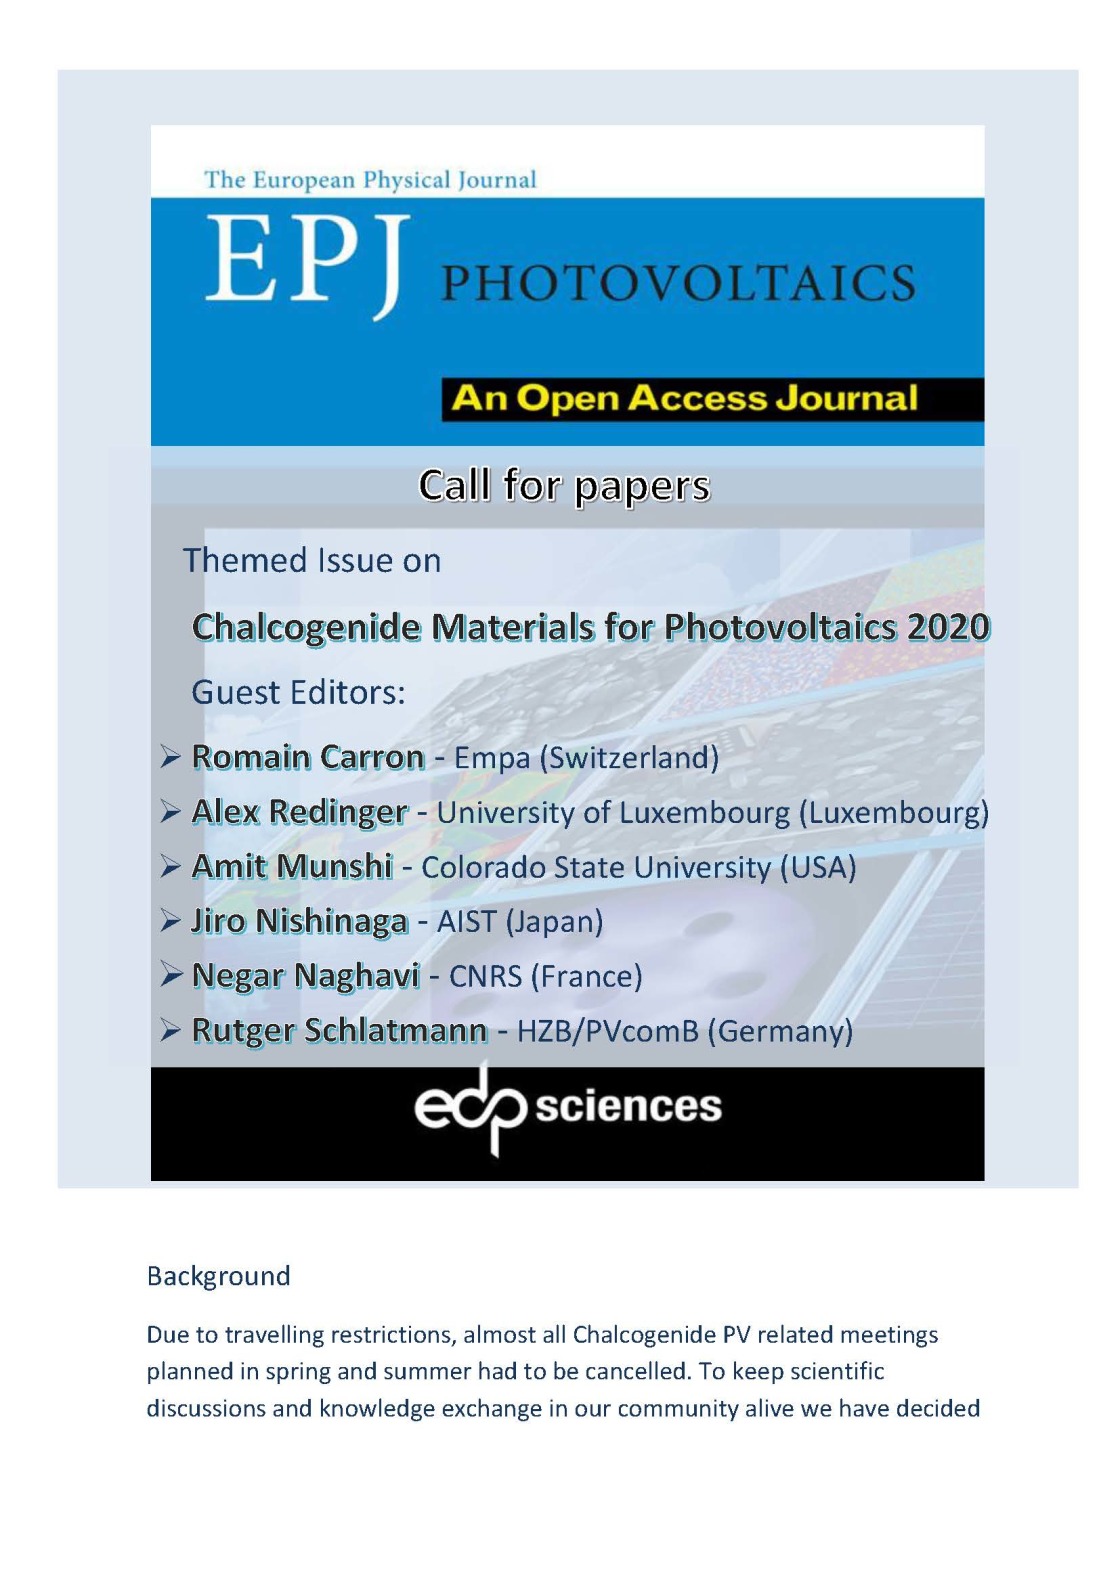 European Physical Journal Photovoltaics - Call for papers Special issue "Chalcogenide Materials for Photovoltaics 2020"